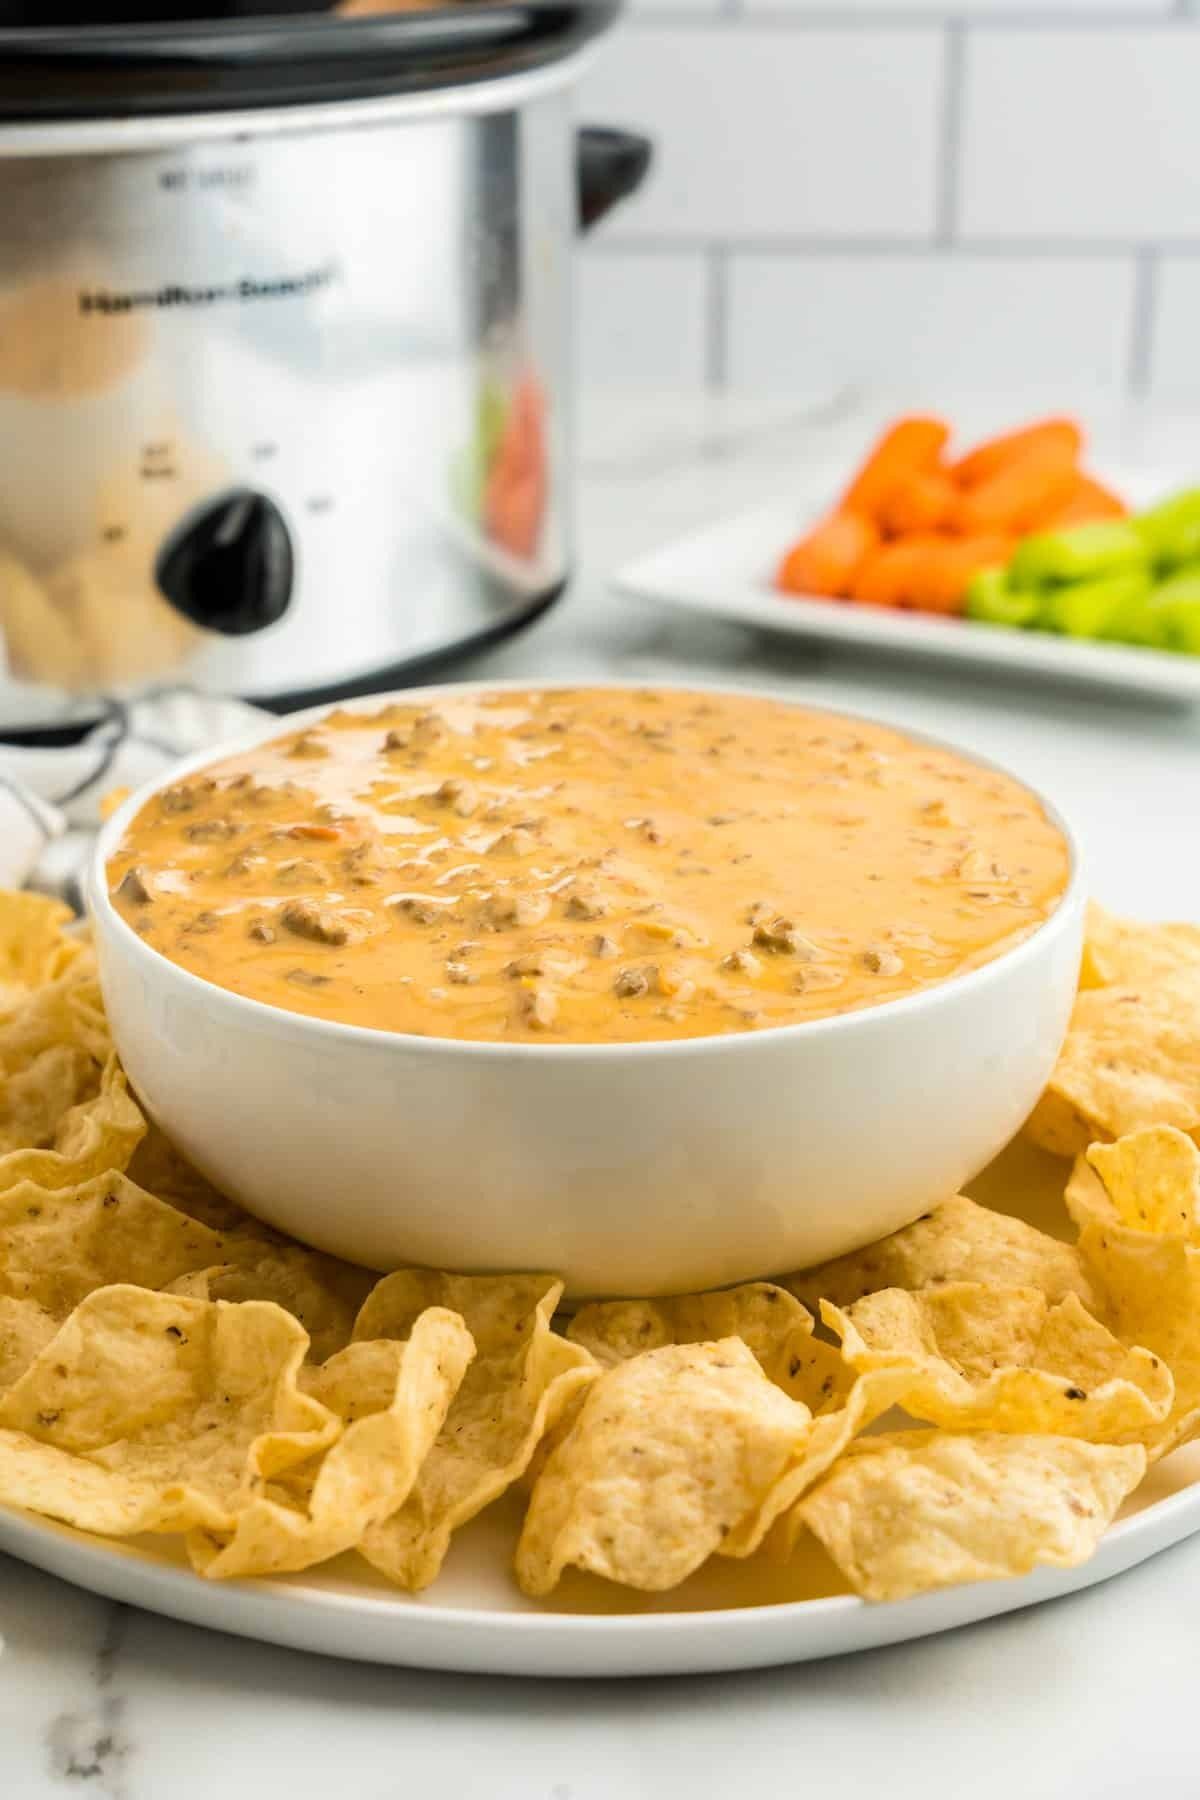 15 Slow Cooker Dip Recipes for Parties - Slow Cooker Gourmet